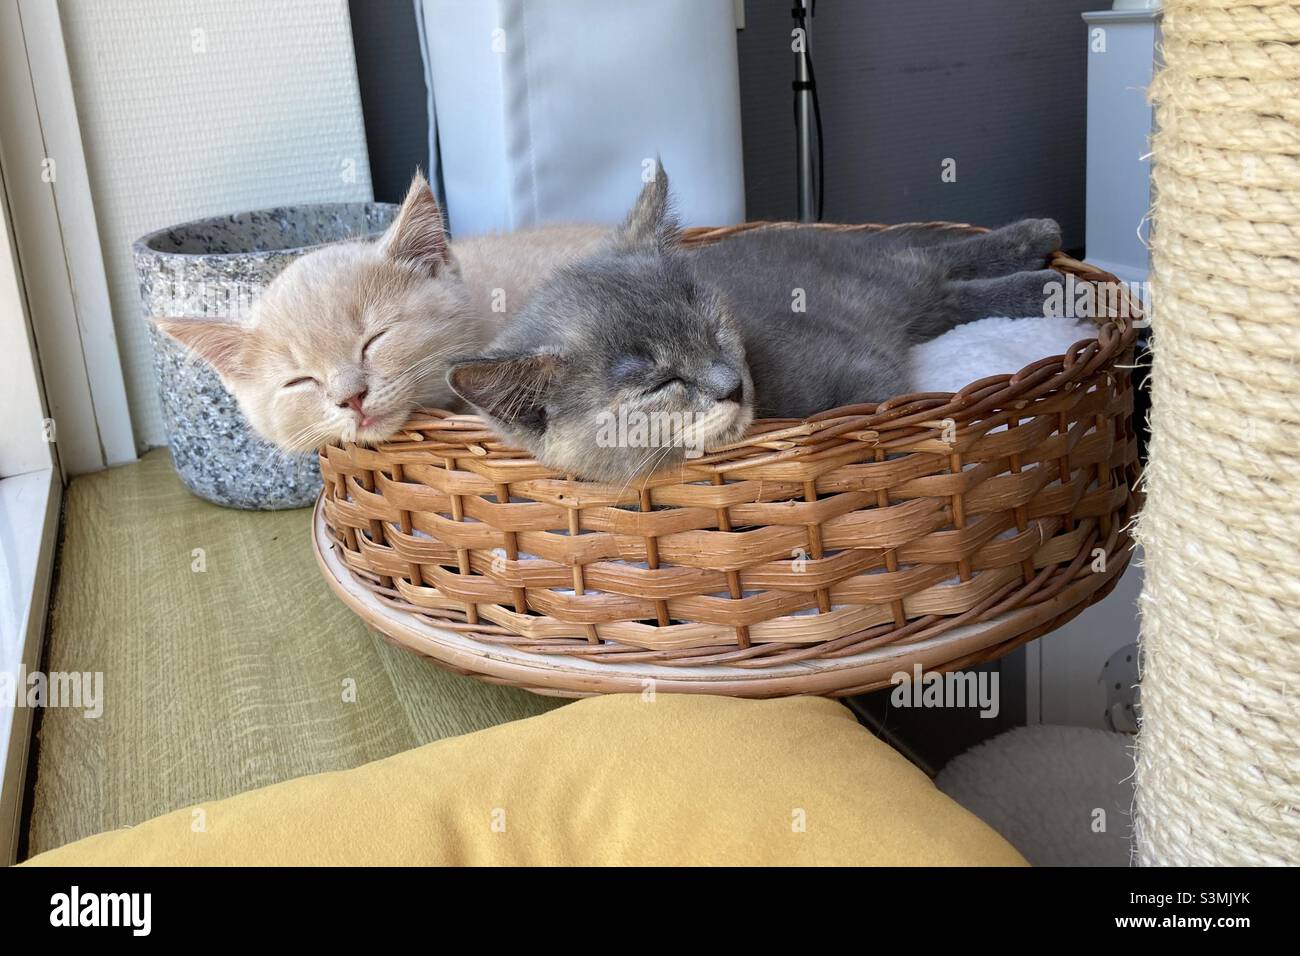 Portrait of two cute kittens napping in a wicker basket Stock Photo